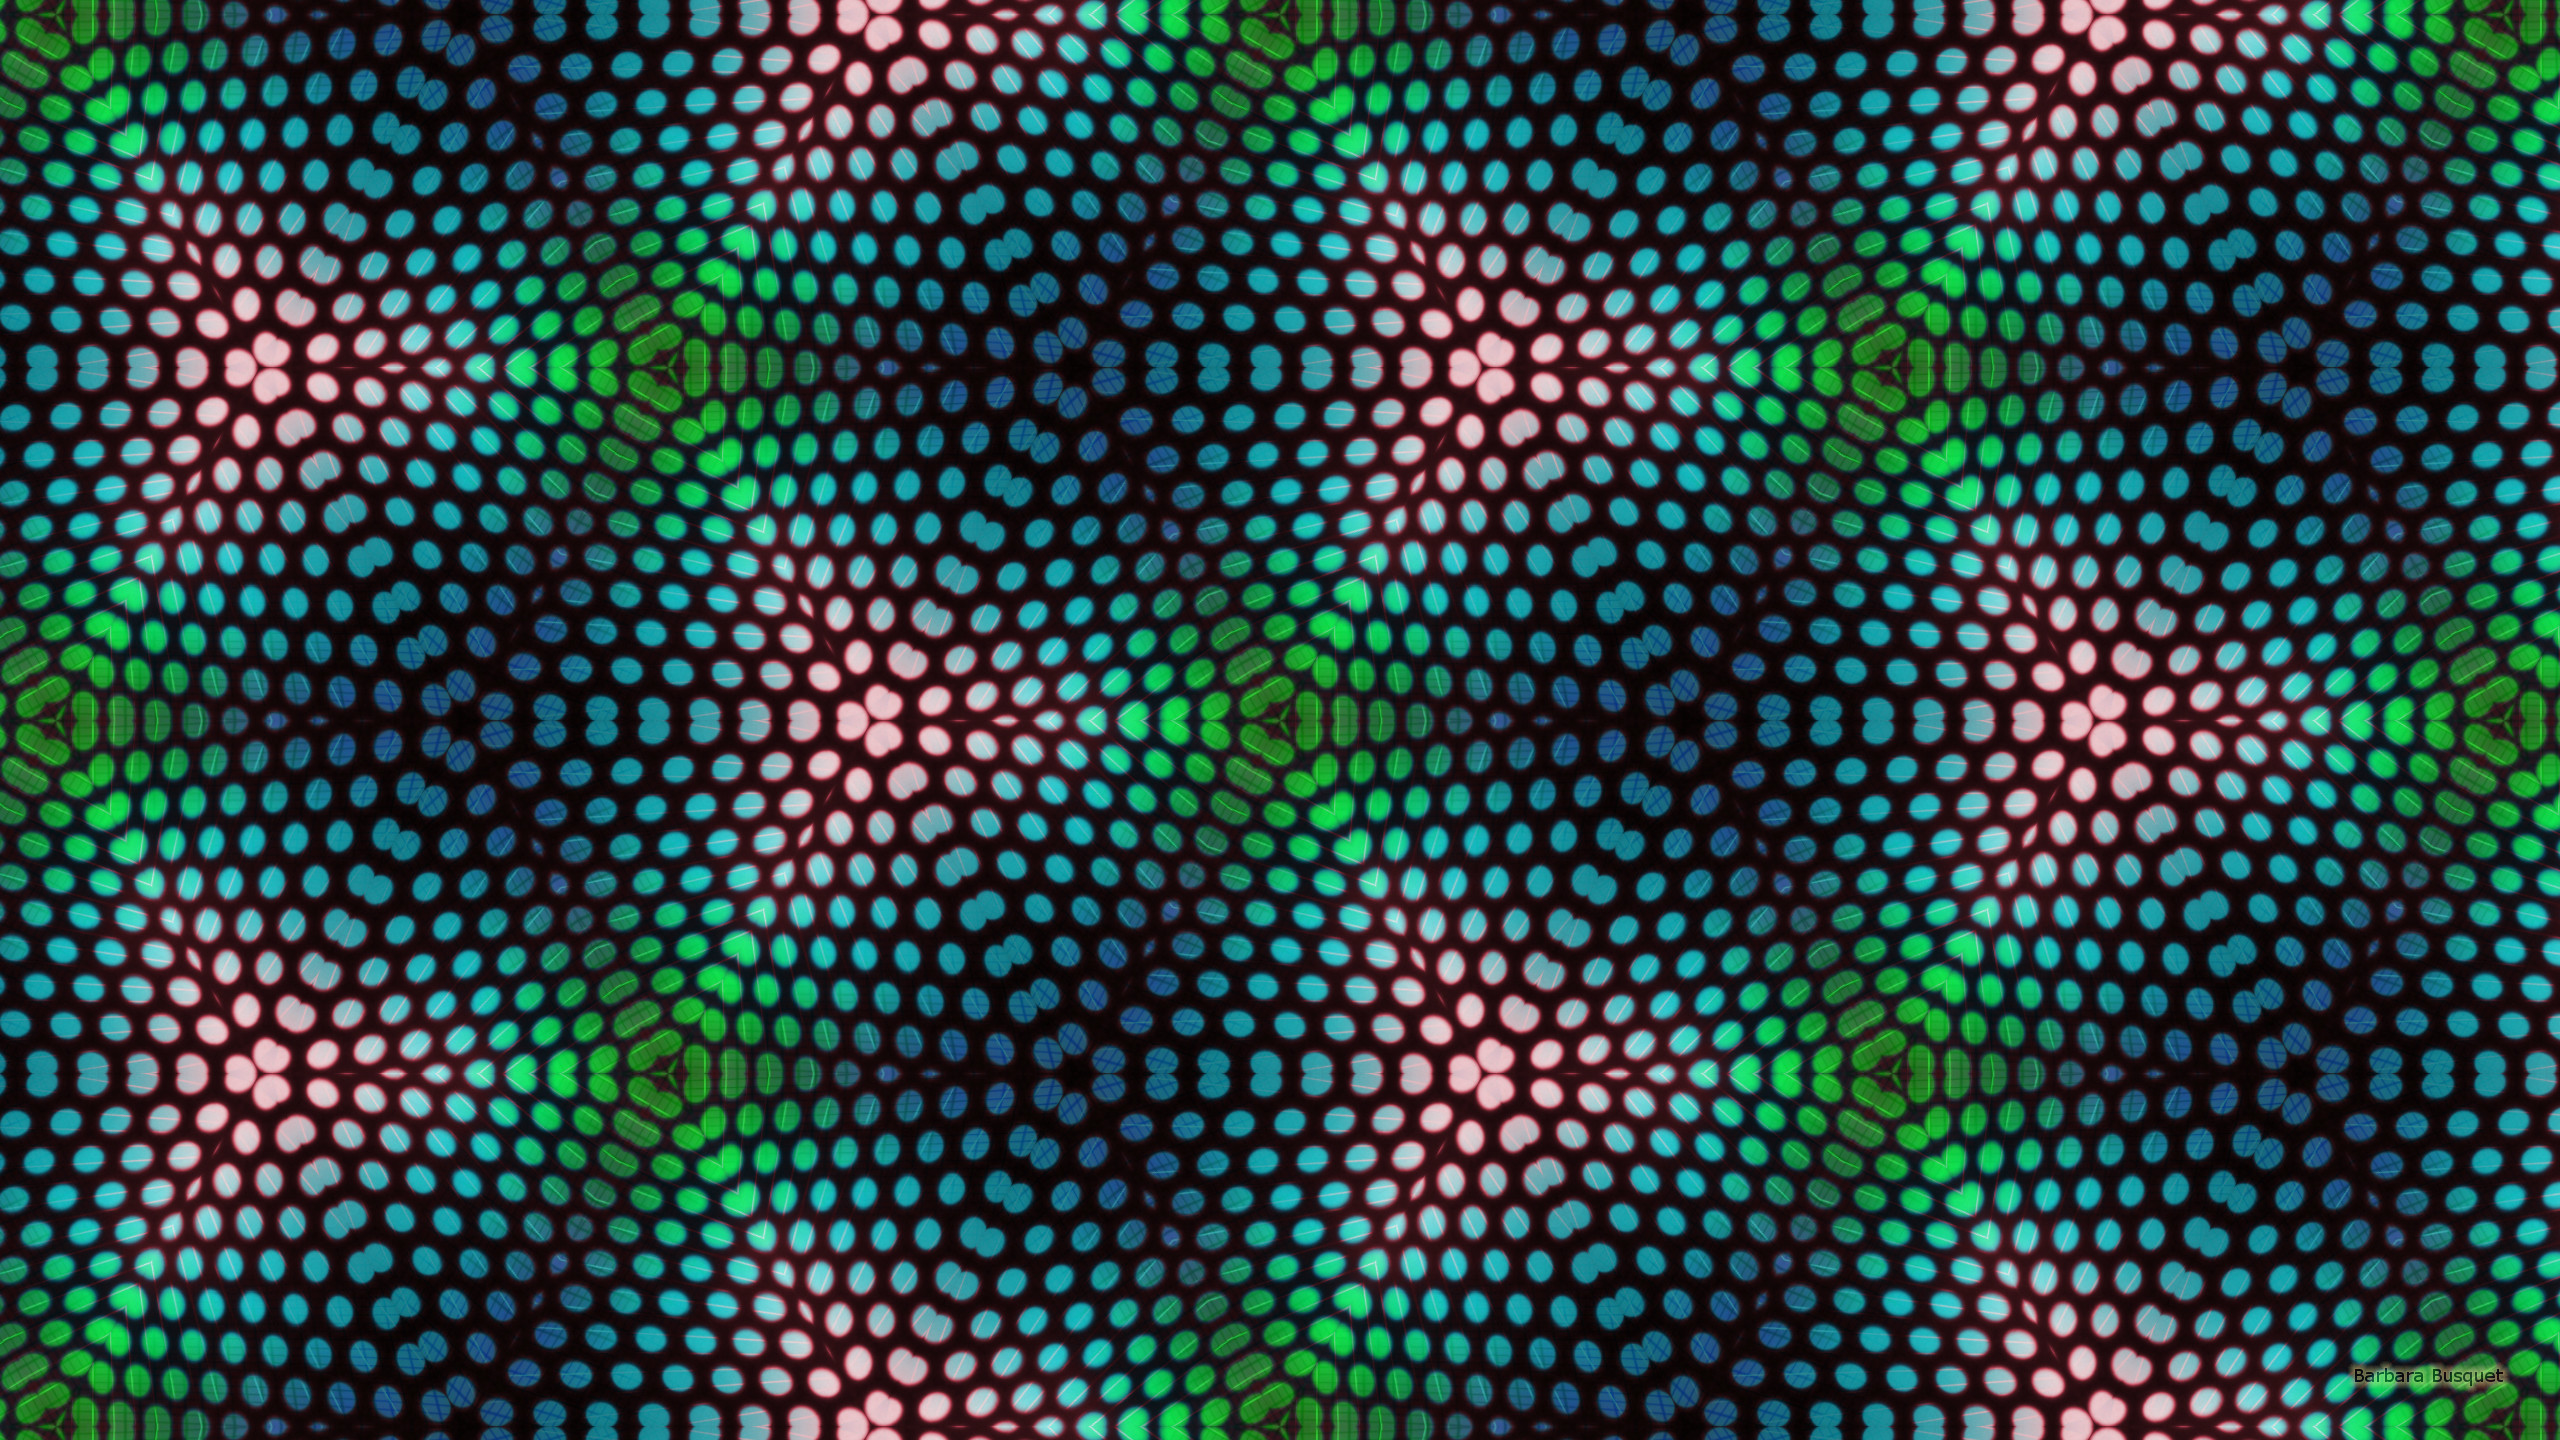 2560x1440 Abstract pattern wallpaper with dots. In green, blue and pink colors.